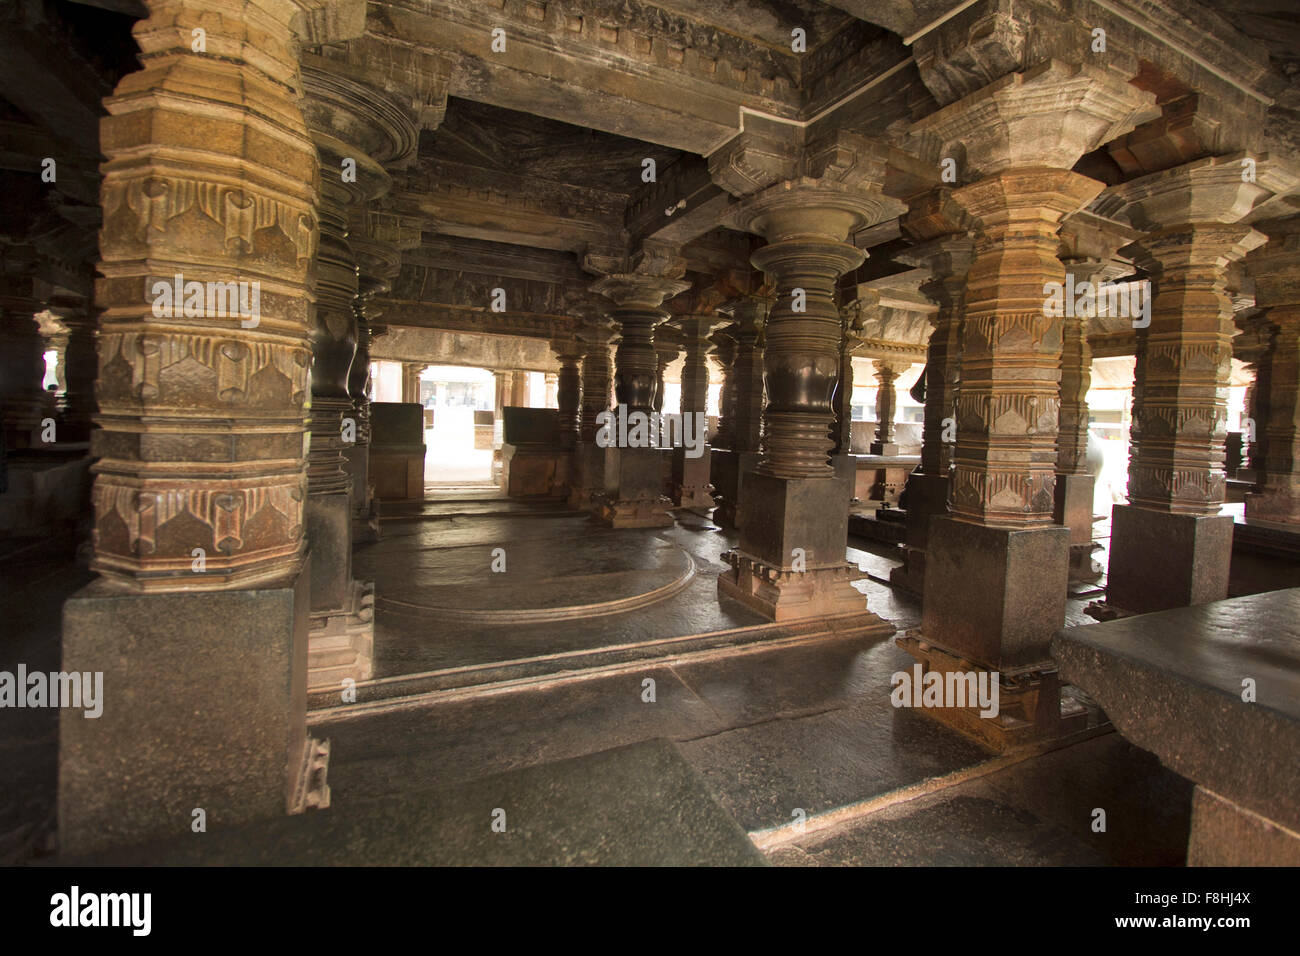 Interiors of the temple complex at Banavasi in Sirsi. Seen here is the dance area for performance to the Shivalinga. Stock Photo